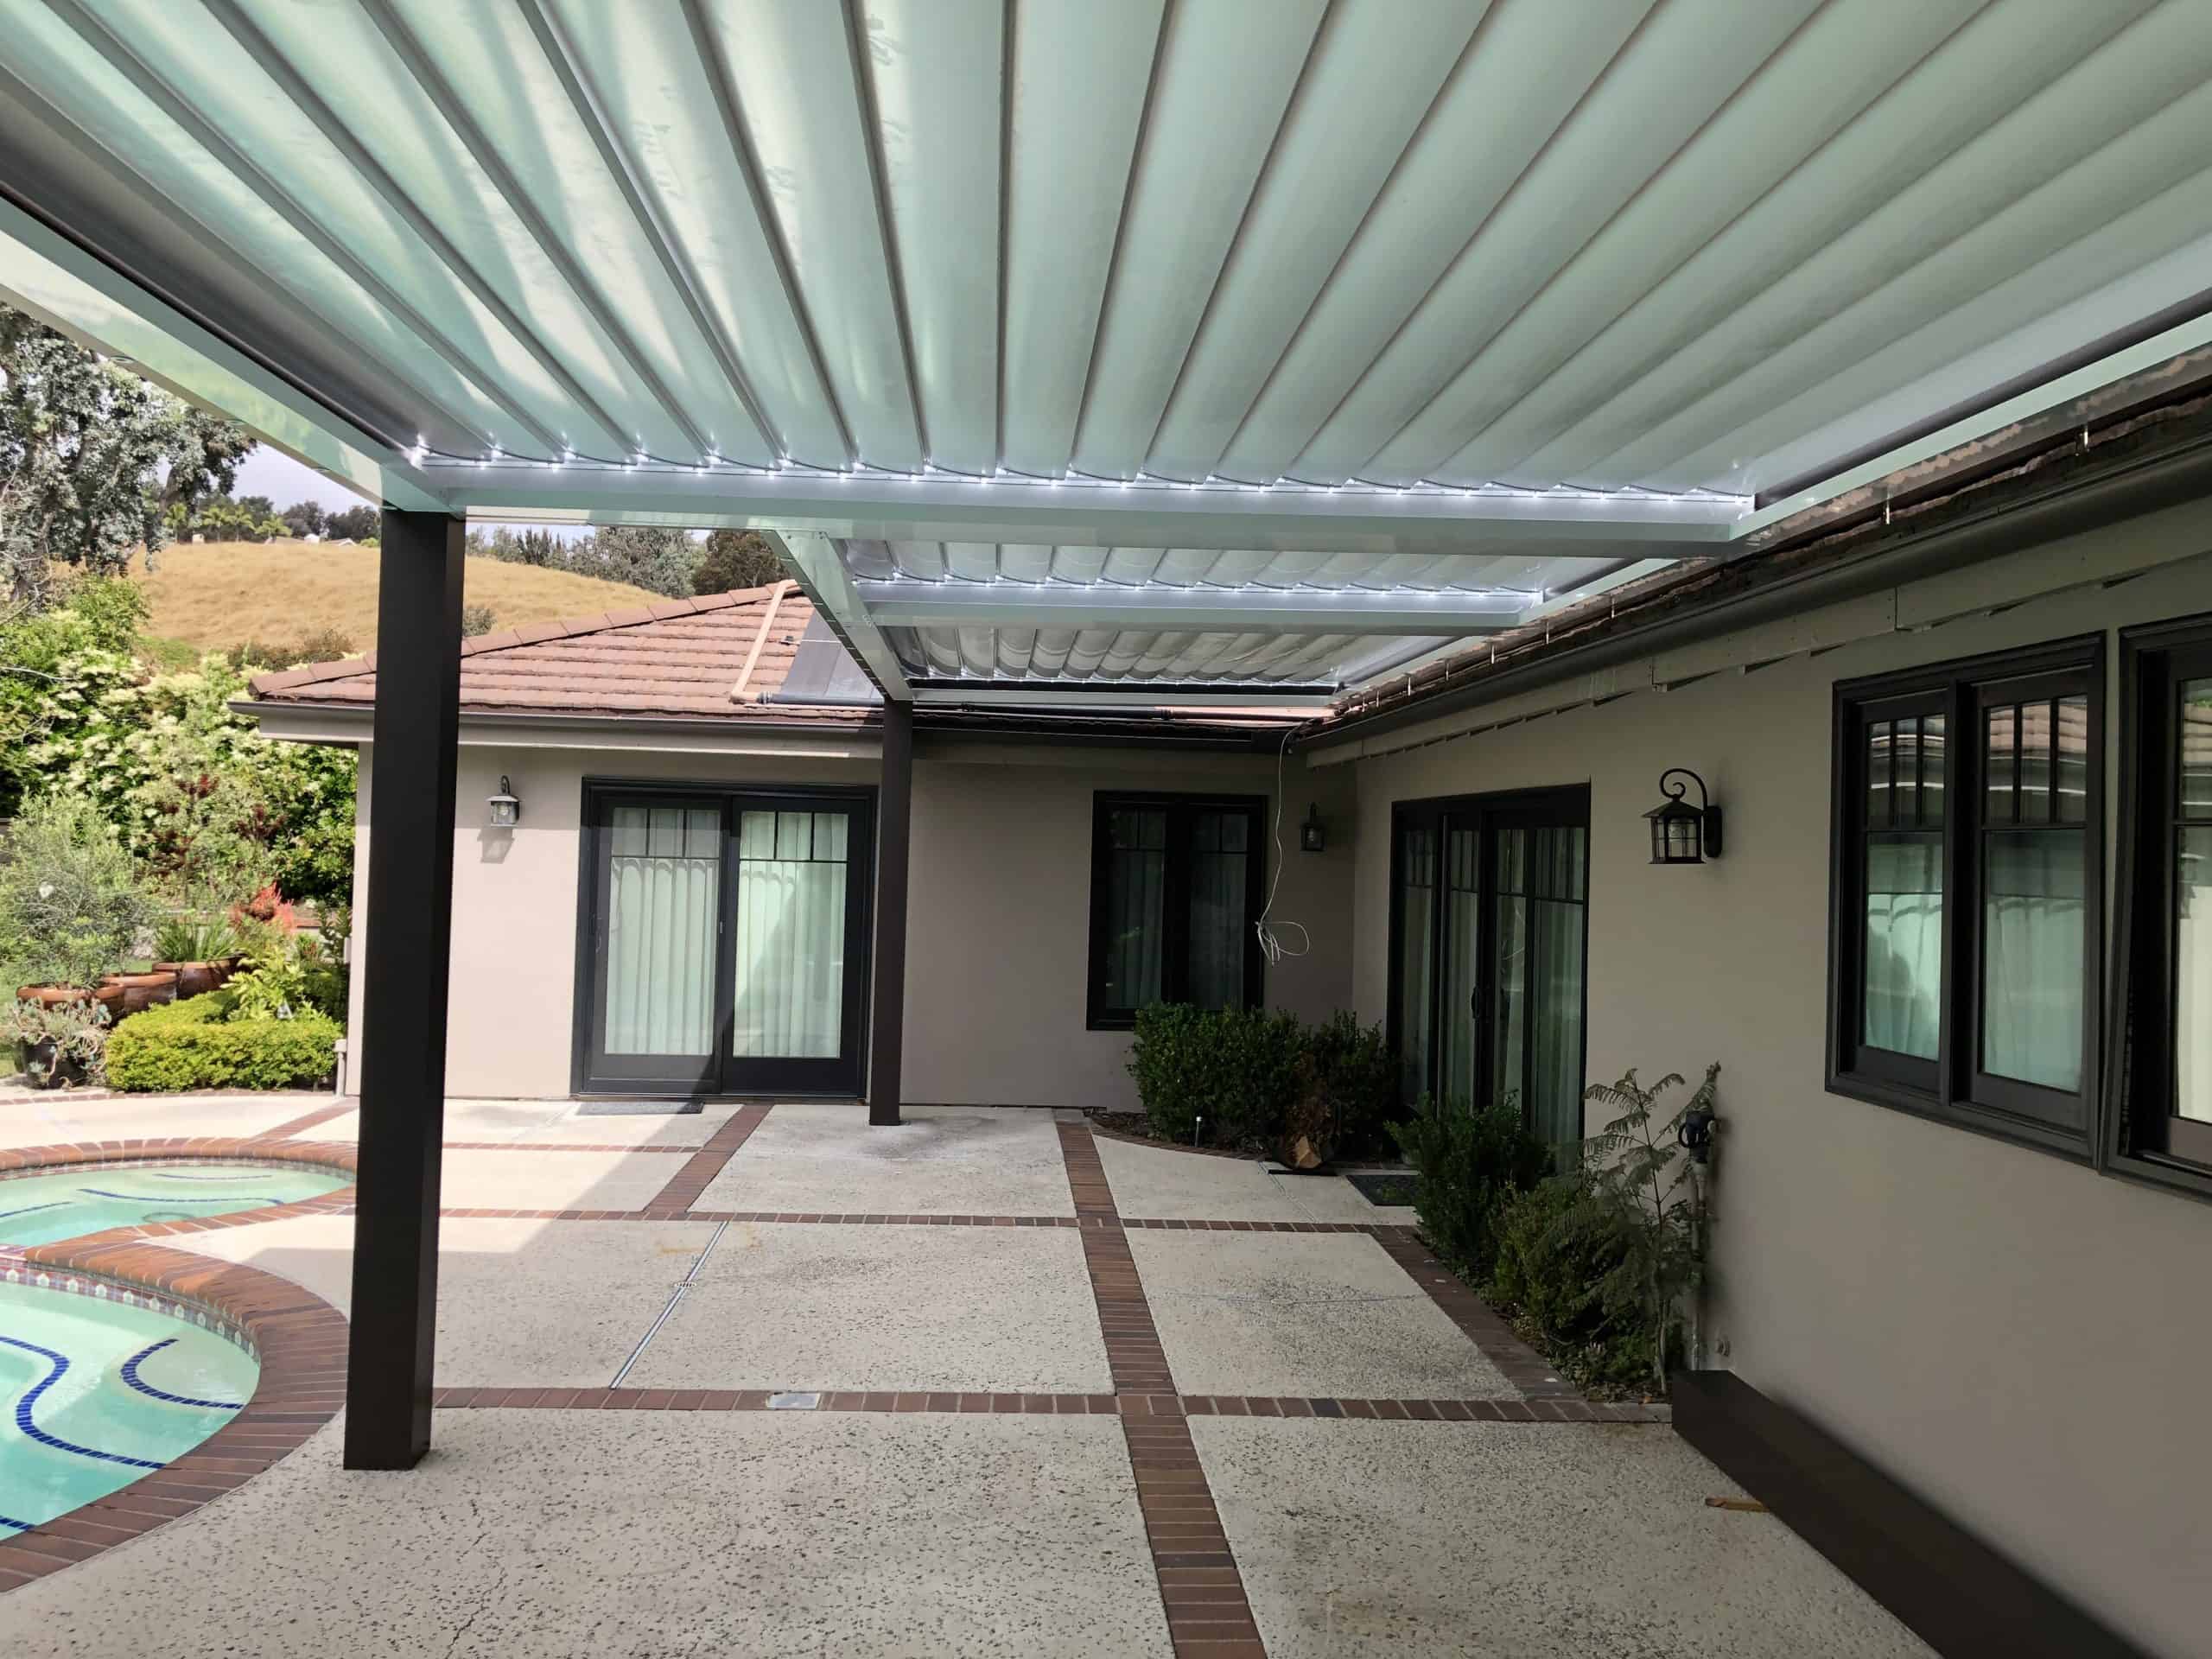 Louvered Patio Covers Inside Information & truths